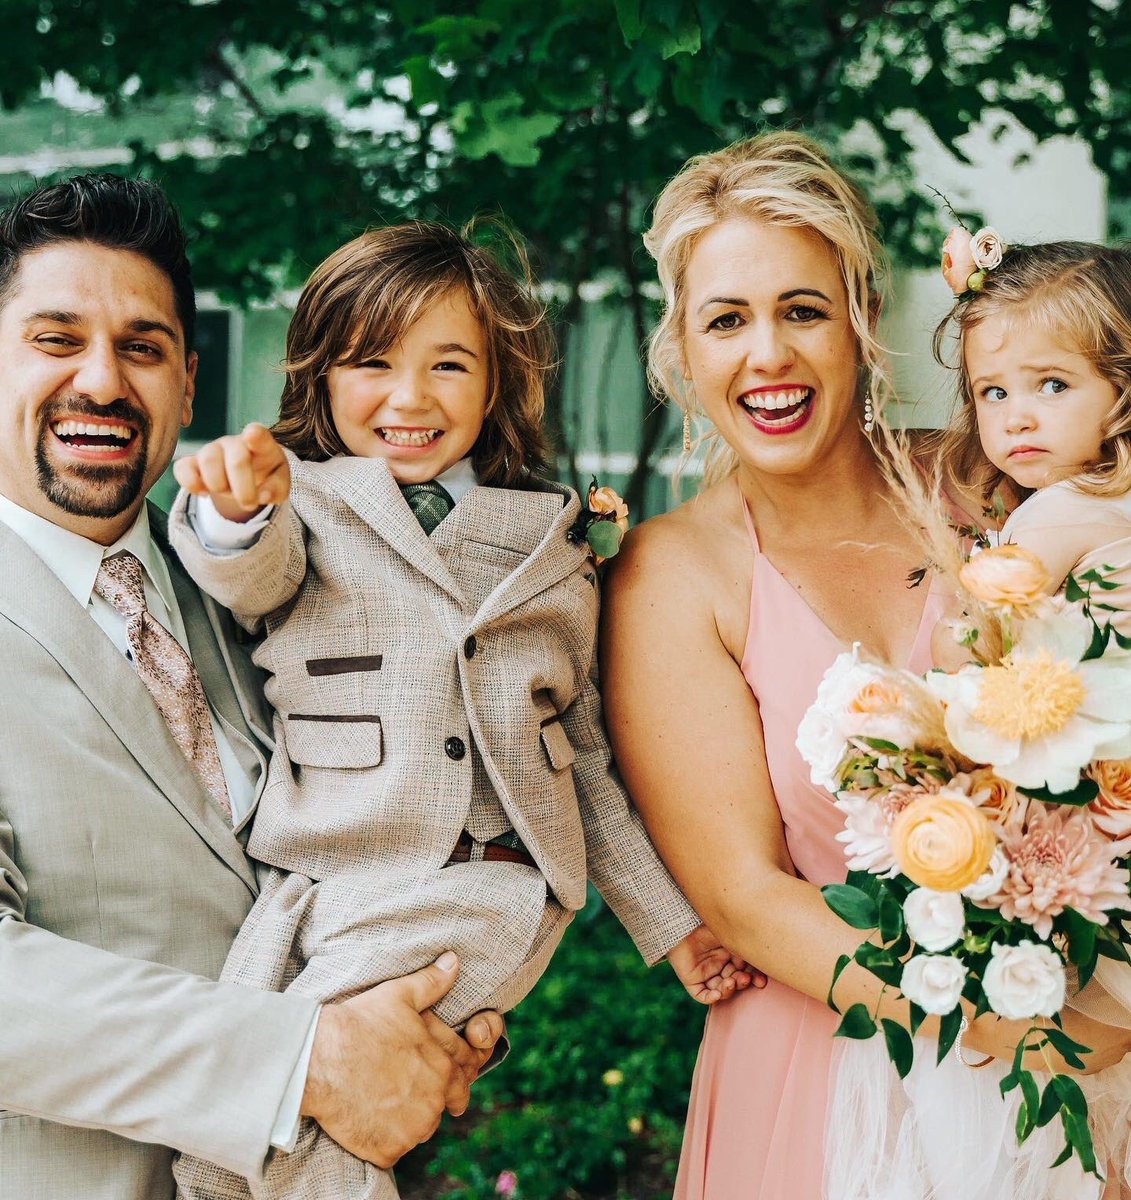 Lovely, cute and gorgeous family 🥰 Thanks to our customers, wishing a wonderful life 💫
Don’t miss our wonderful suits for men and boys at SIRRI 😍

bit.ly/2XnOlCz

#boys #men #fashion #wedding #summer #style #boysstyle #menstyle #baptism #communiondressshopping